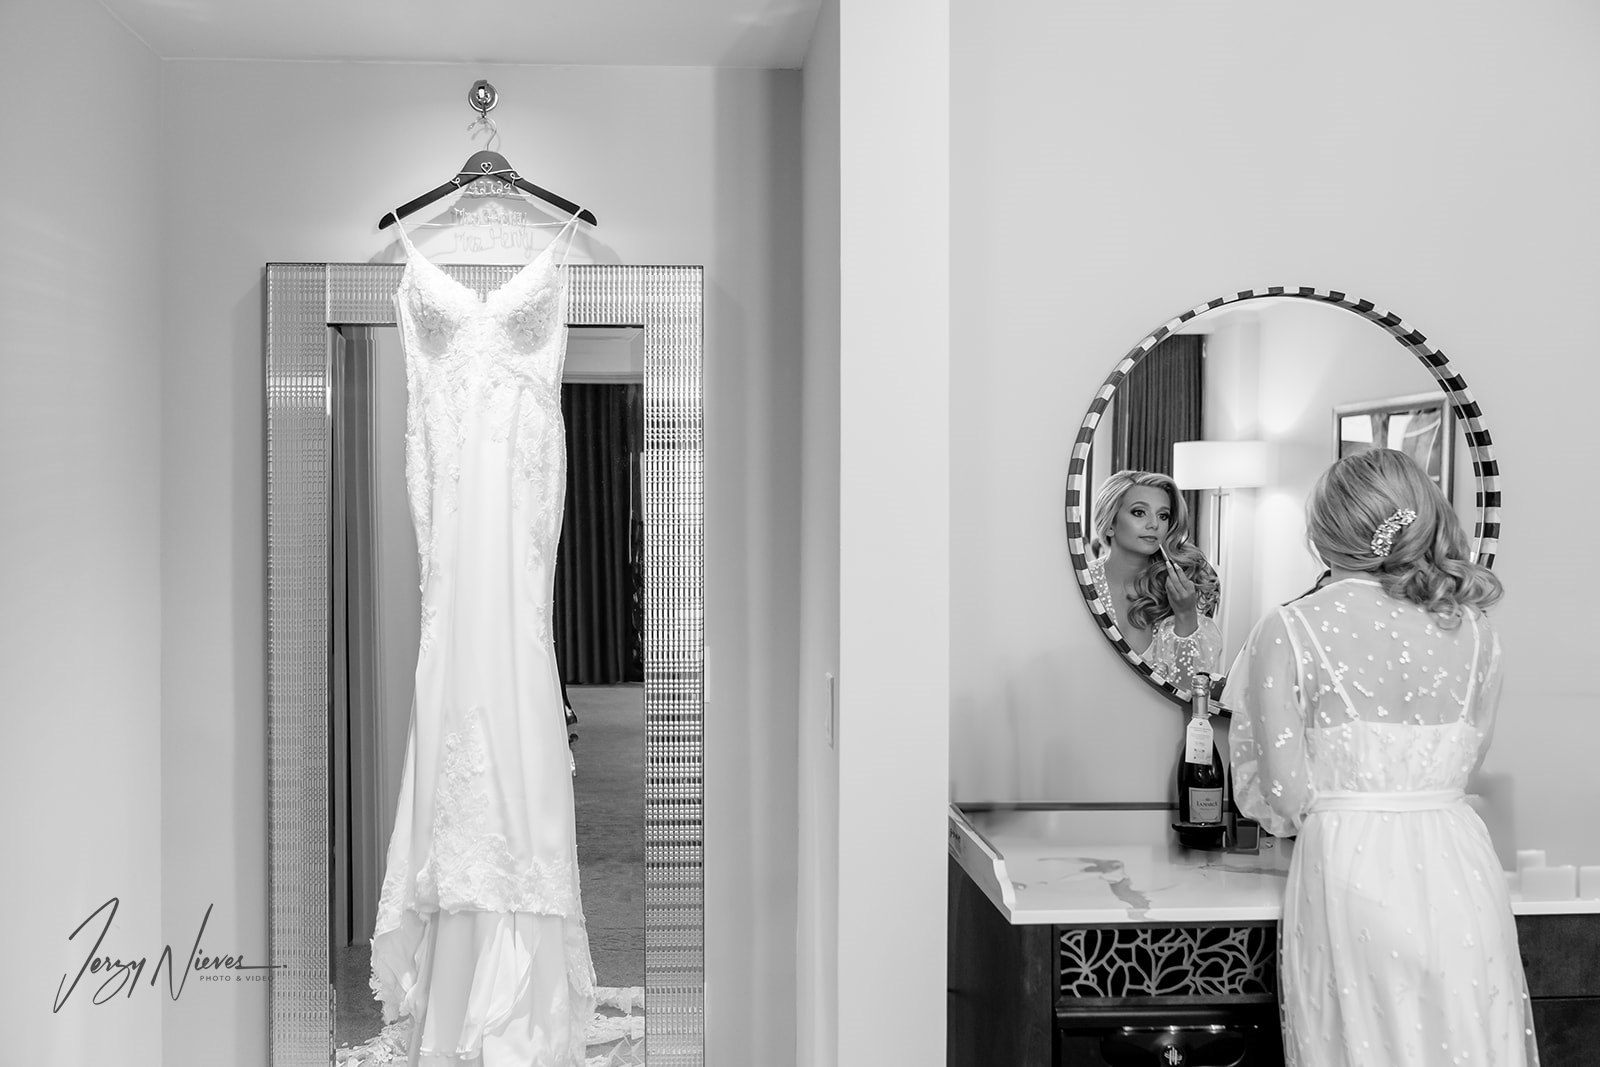 Black and white image of the bride finishing her preparations in front of a mirror, with her wedding dress hanging beside her.